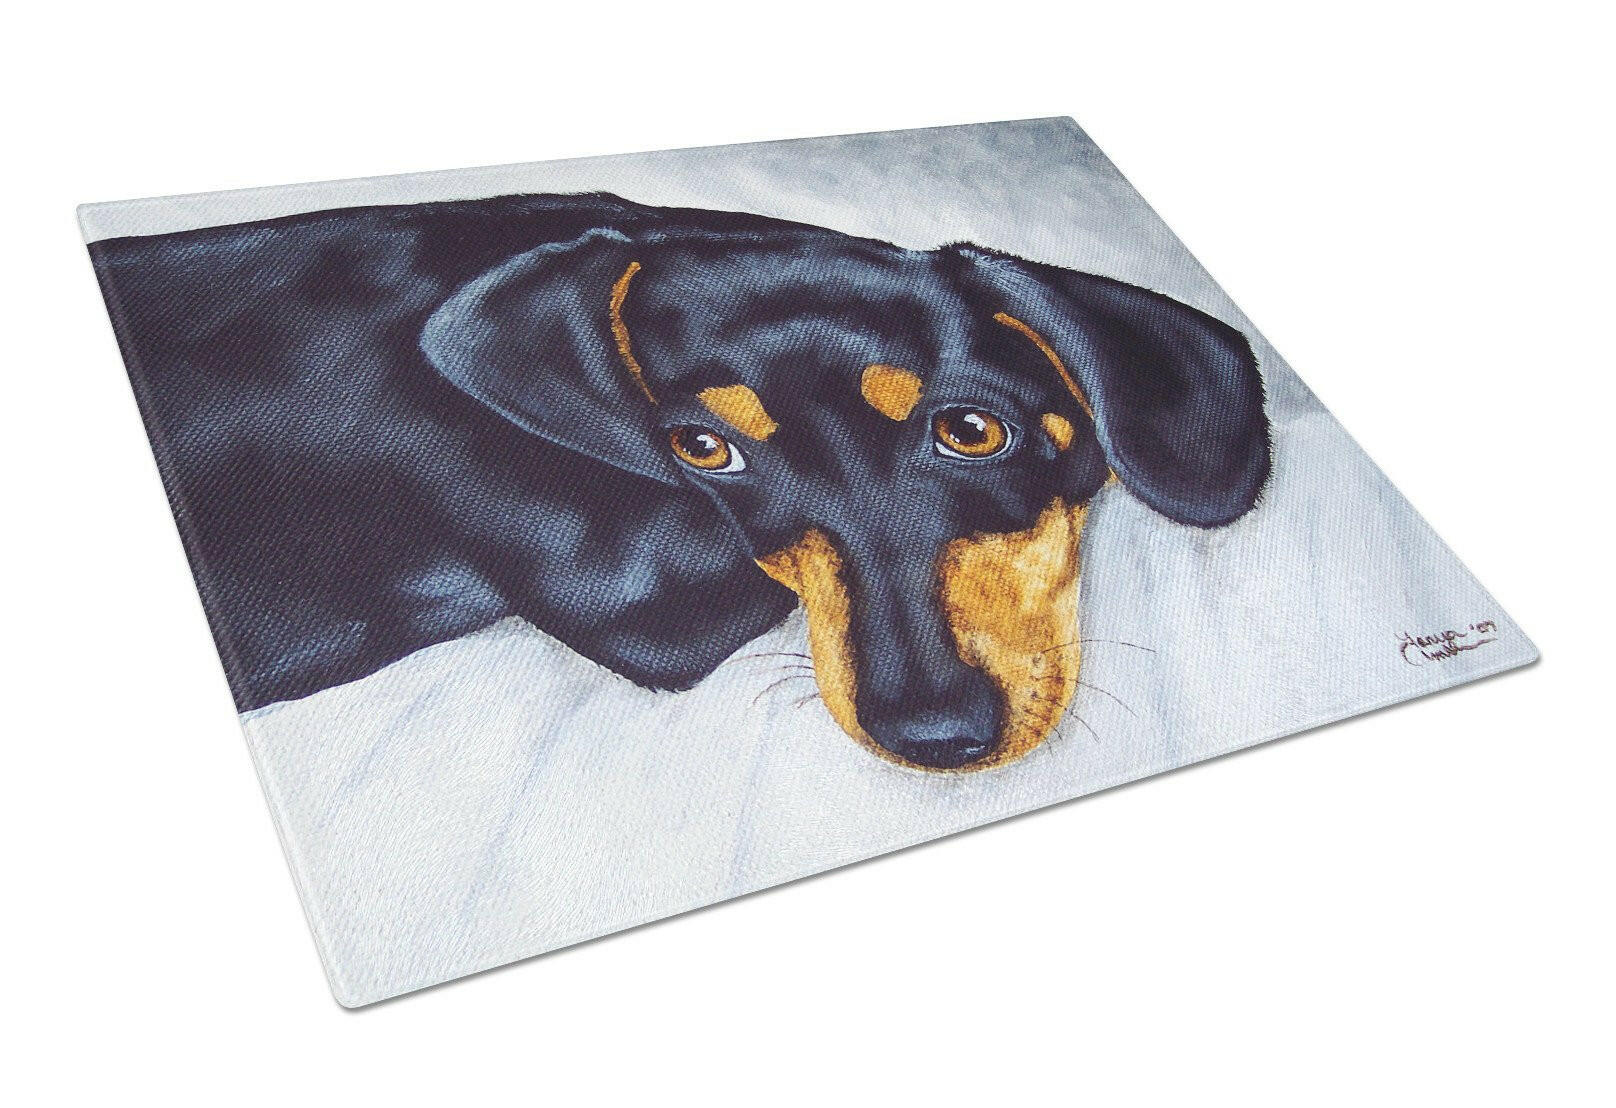 Black and Tan Doxie Dachshund Glass Cutting Board Large AMB1079LCB by Caroline's Treasures